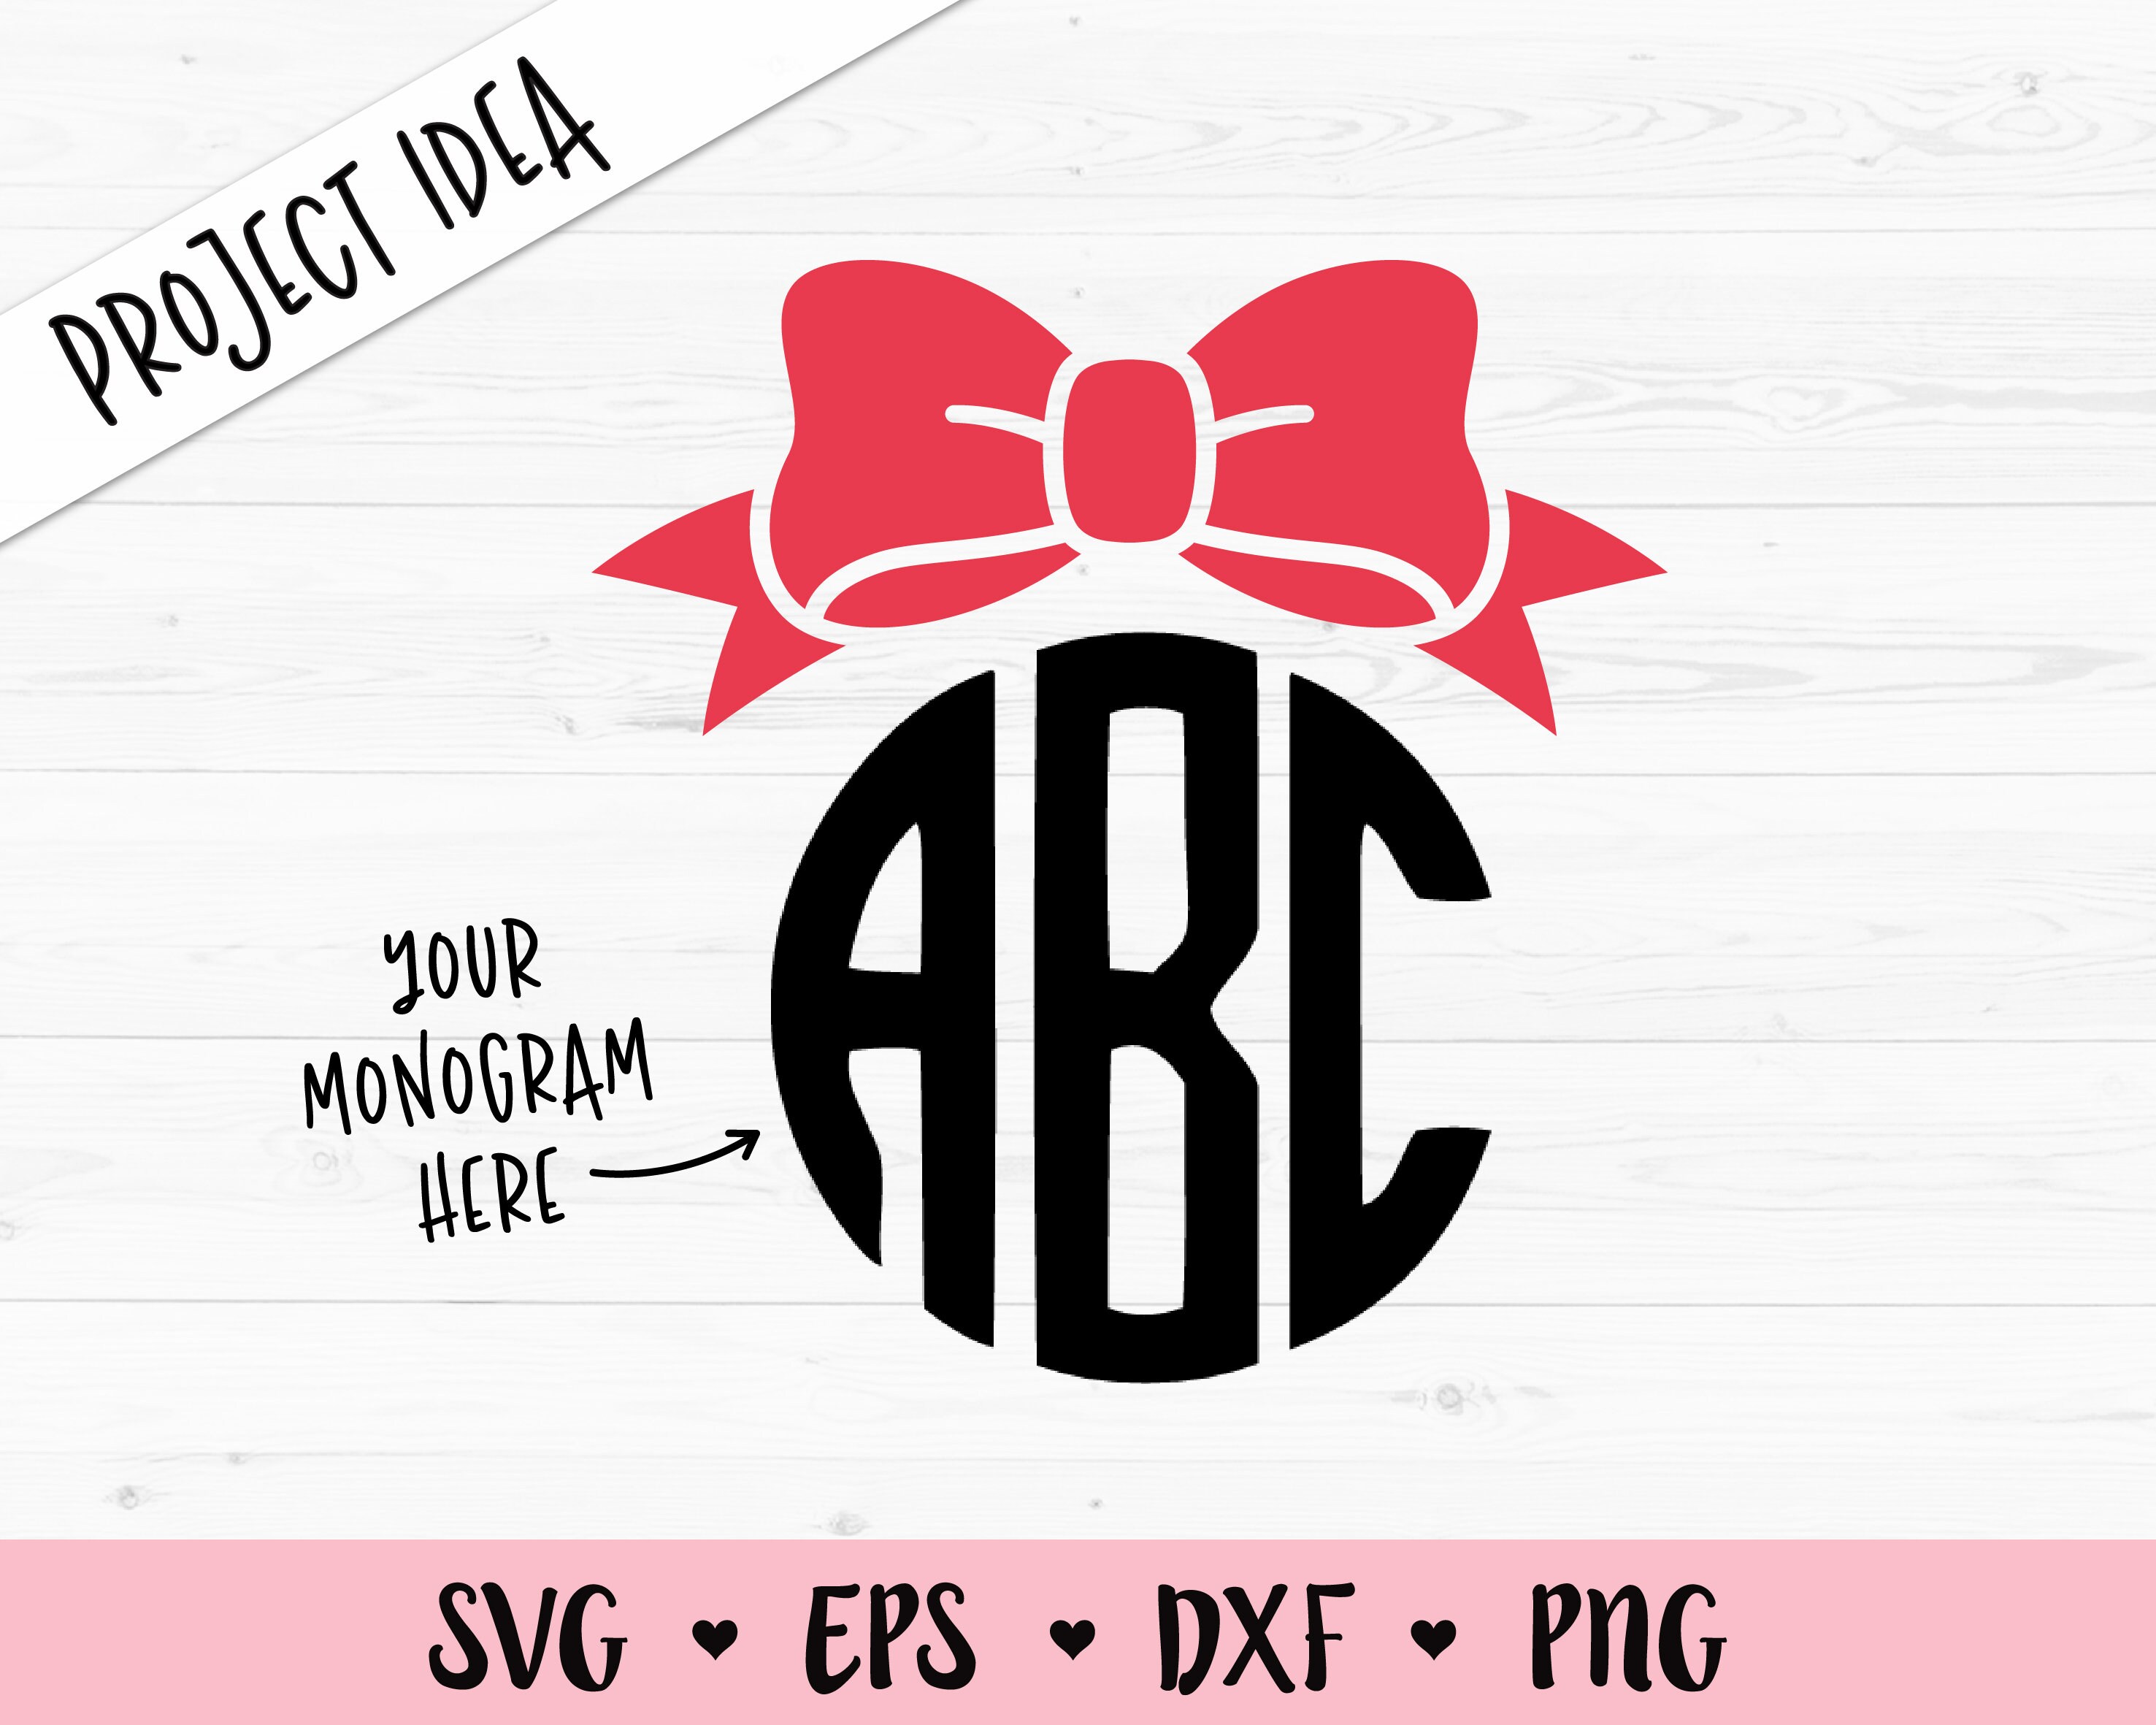 cute and beautiful bow tie ribbon knot svg bundle By greatype19